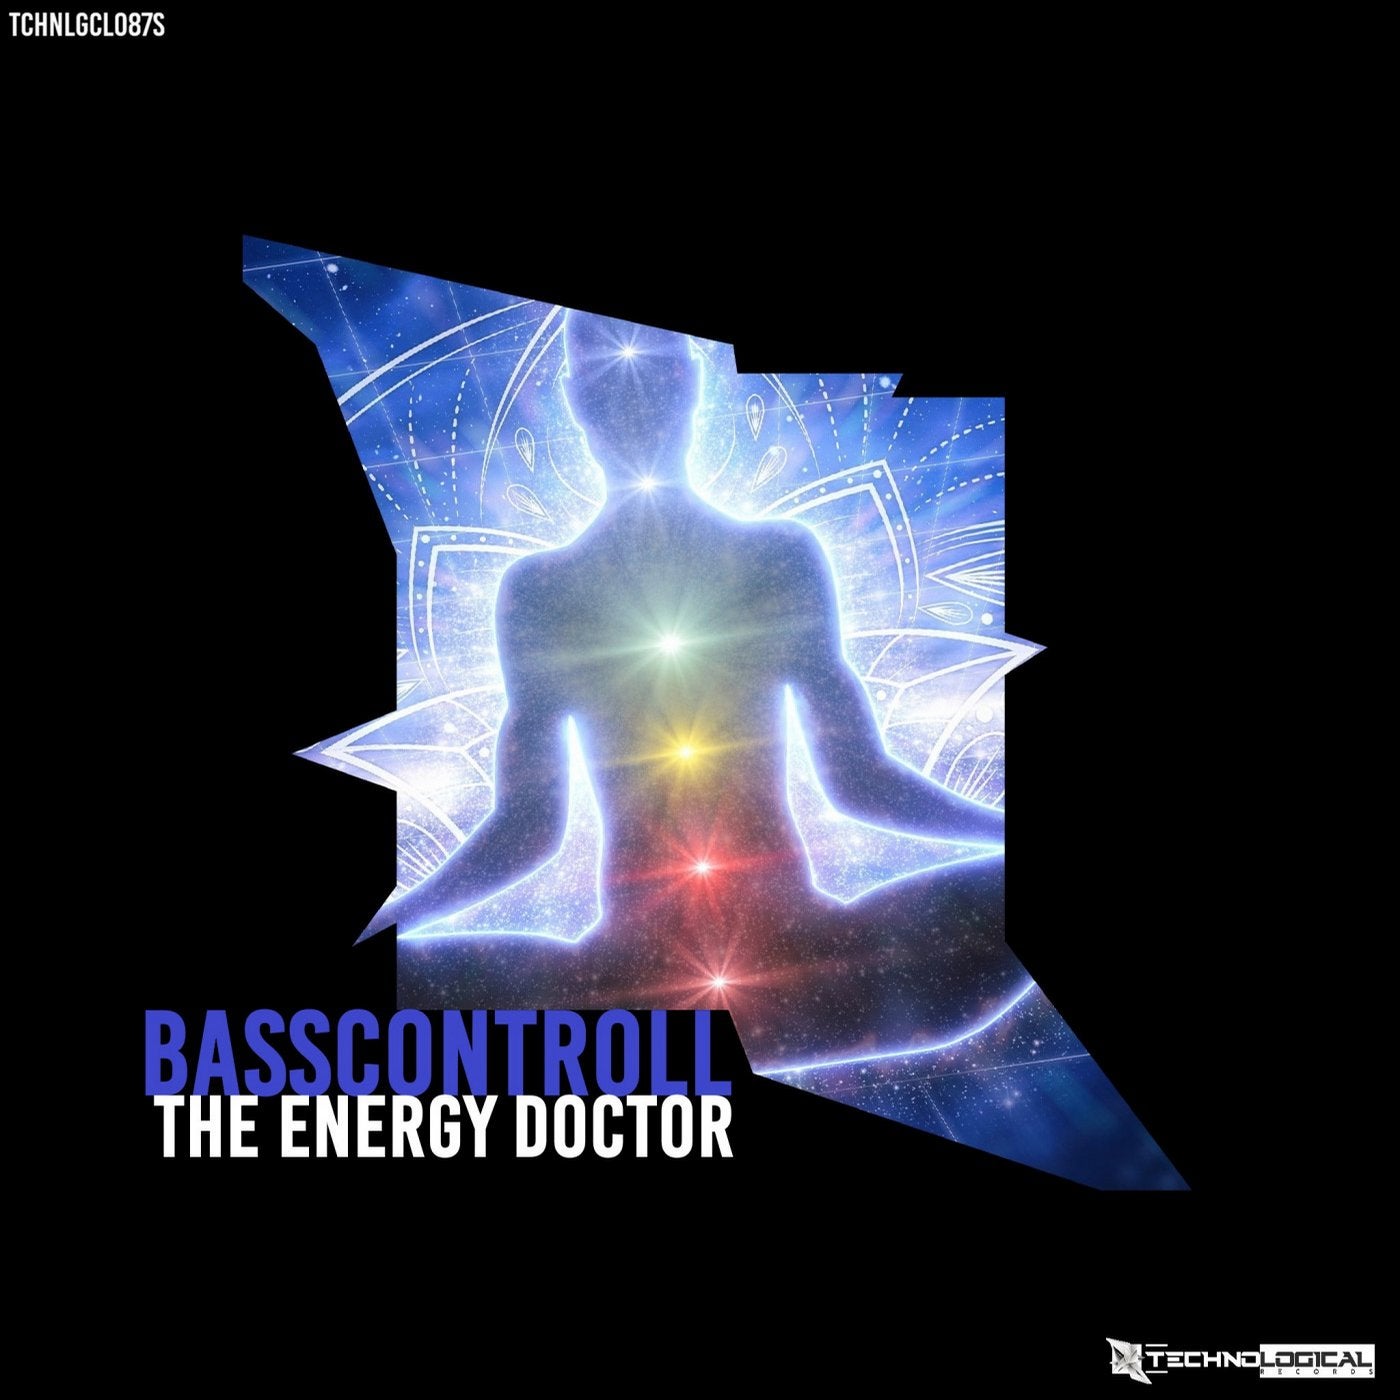 The Energy Doctor